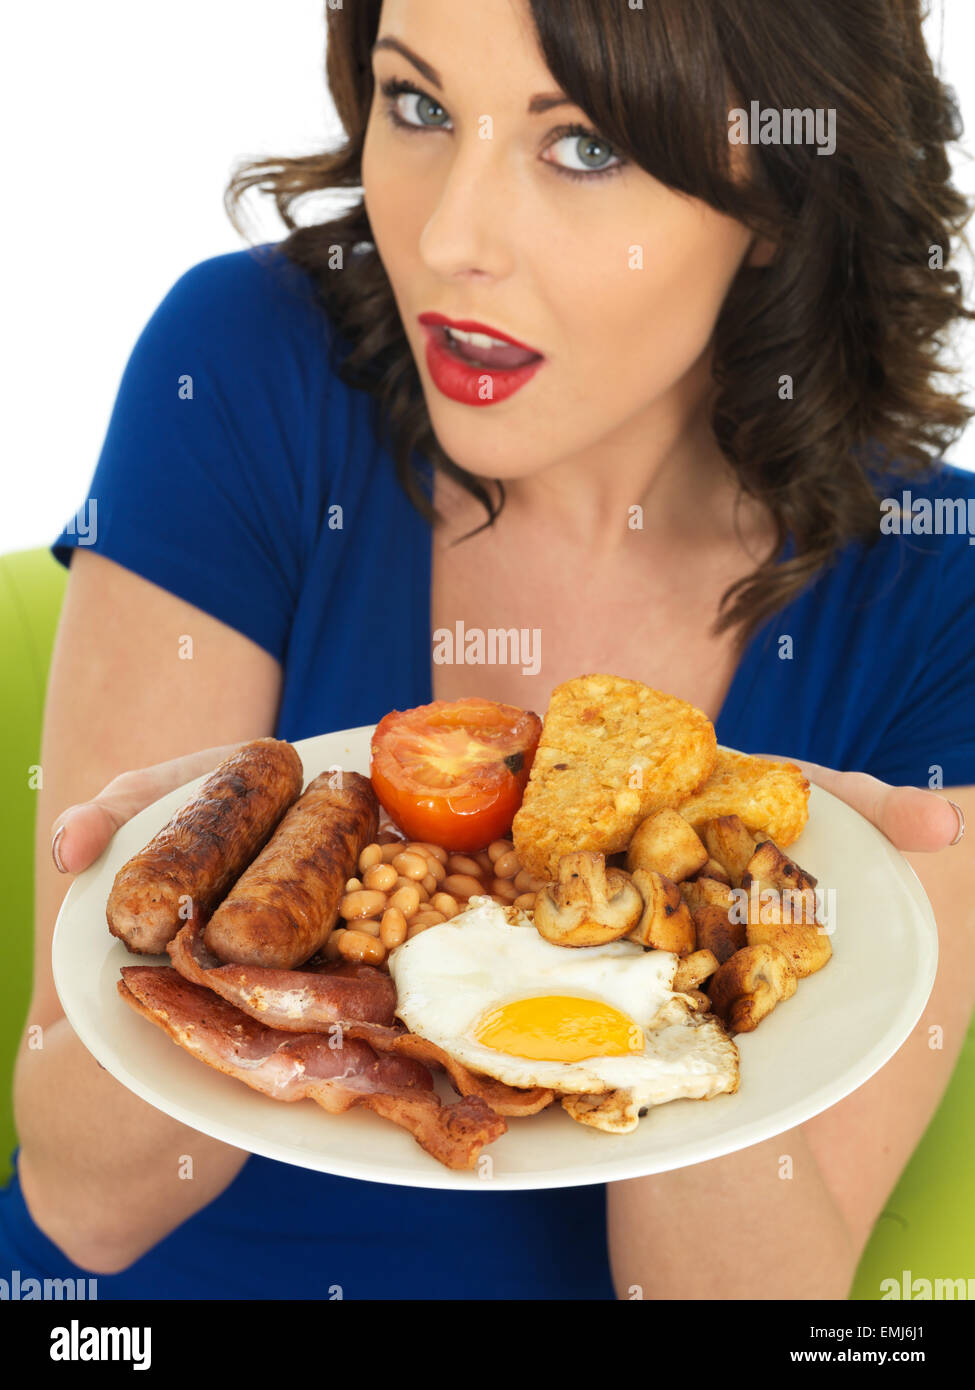 Stock Photo - Young Attractive Woman Eating a <b>Full English</b> Breakfast - young-attractive-woman-eating-a-full-english-breakfast-EMJ6J1